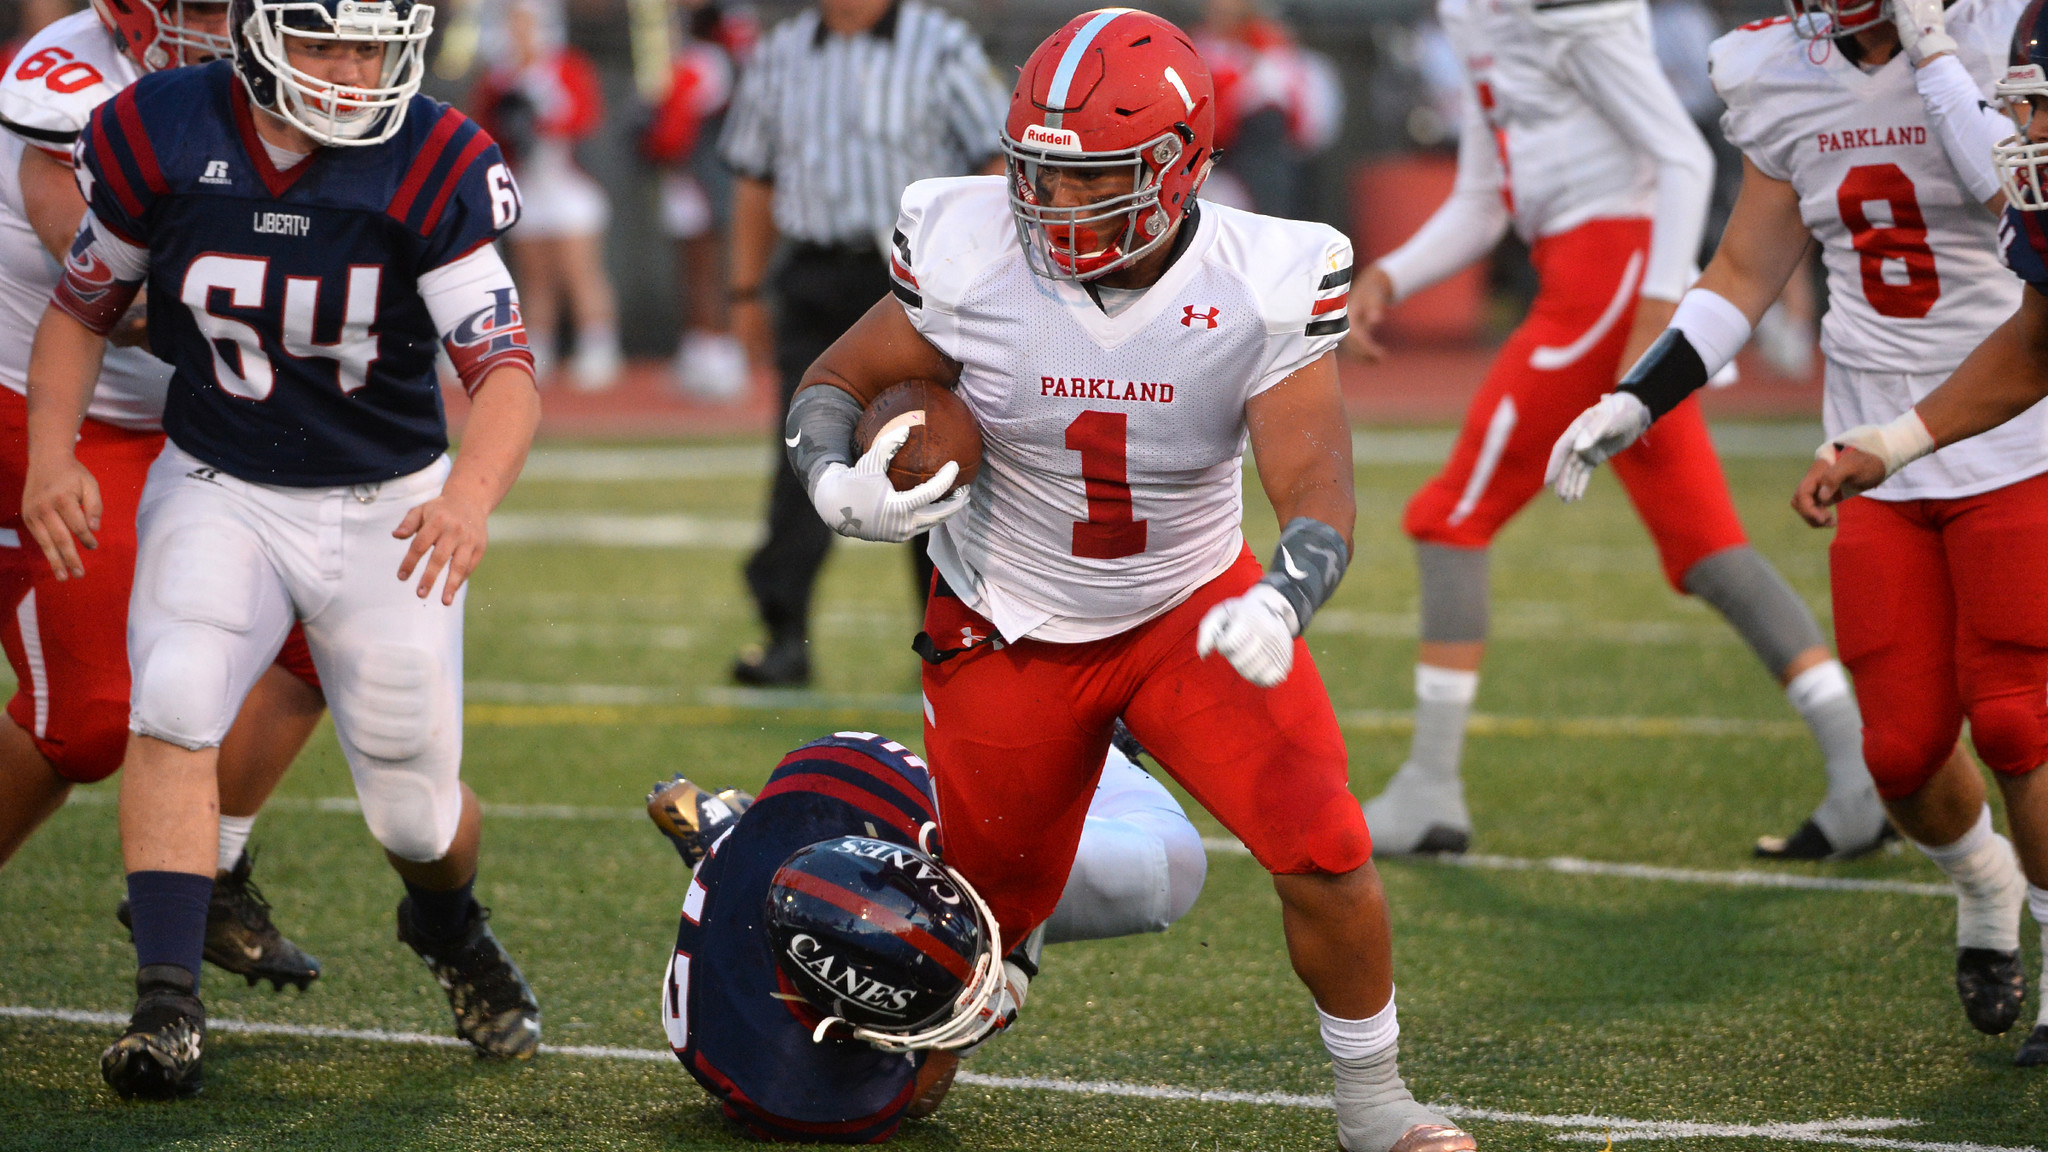 Parkland football rushes to win over Liberty, 24-7 - The Morning Call2048 x 1152